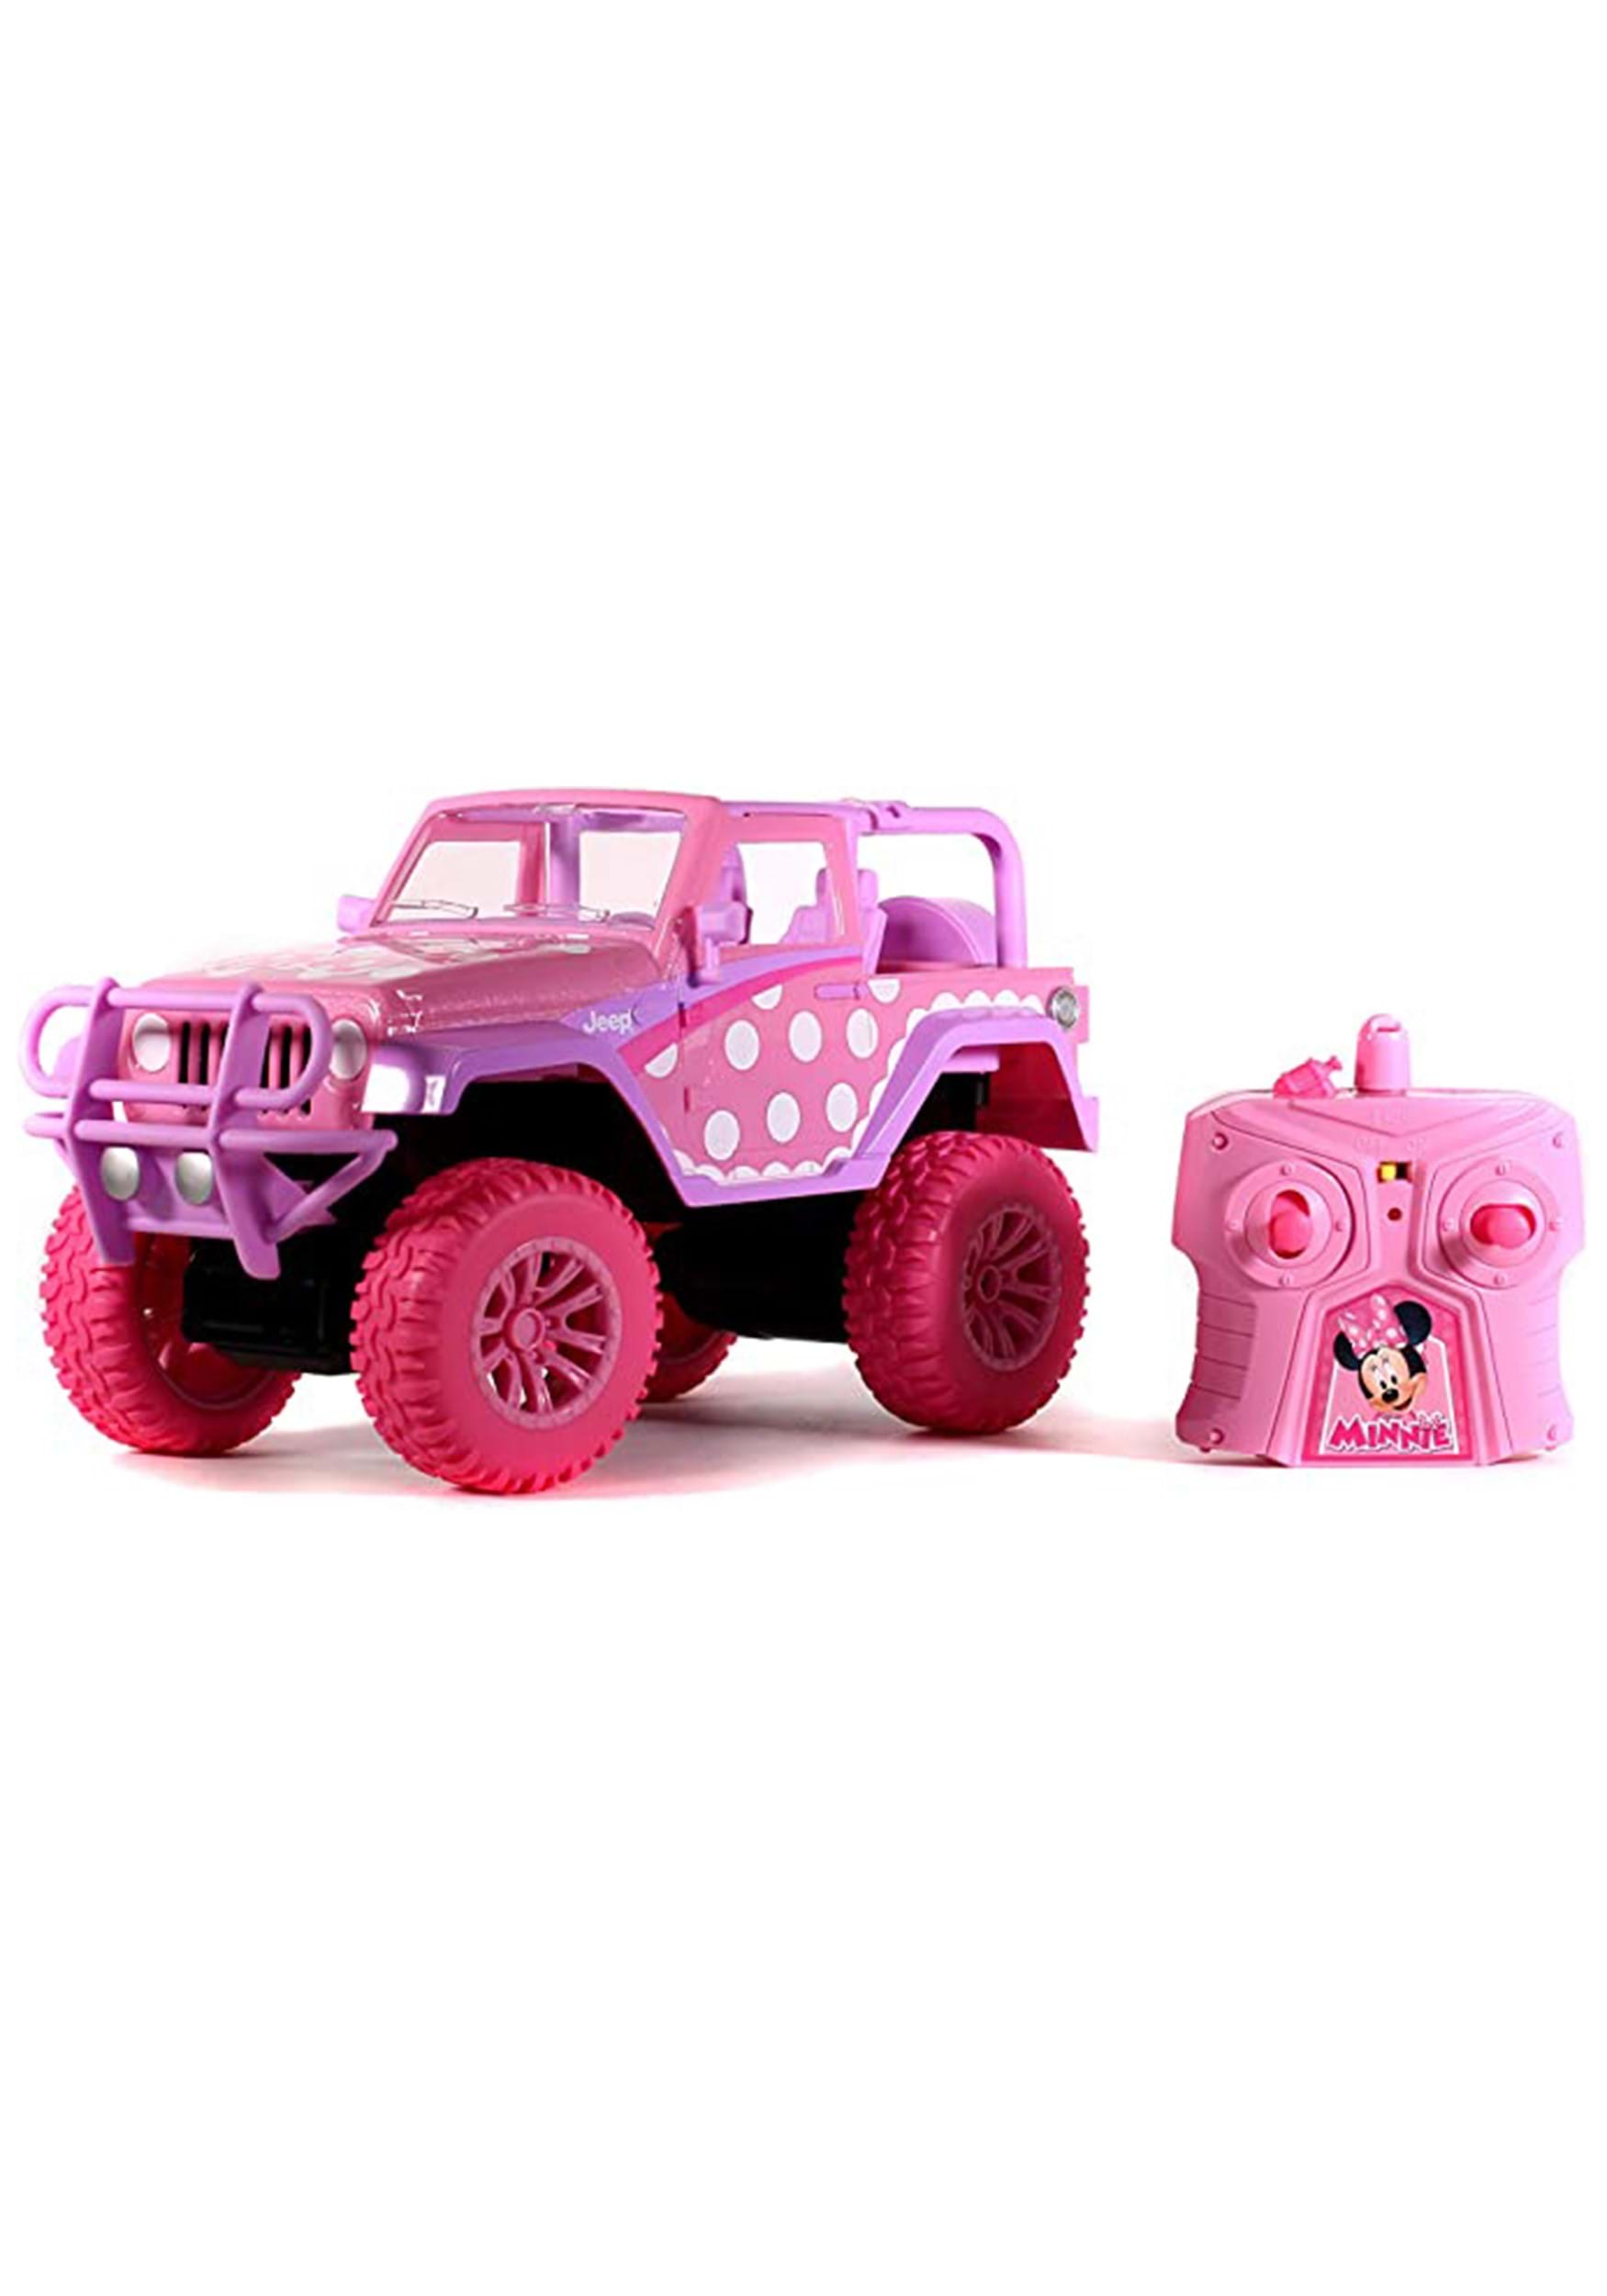 Disney Minnie Mouse Jeep 1:16 Scale Remote Control Vehicle